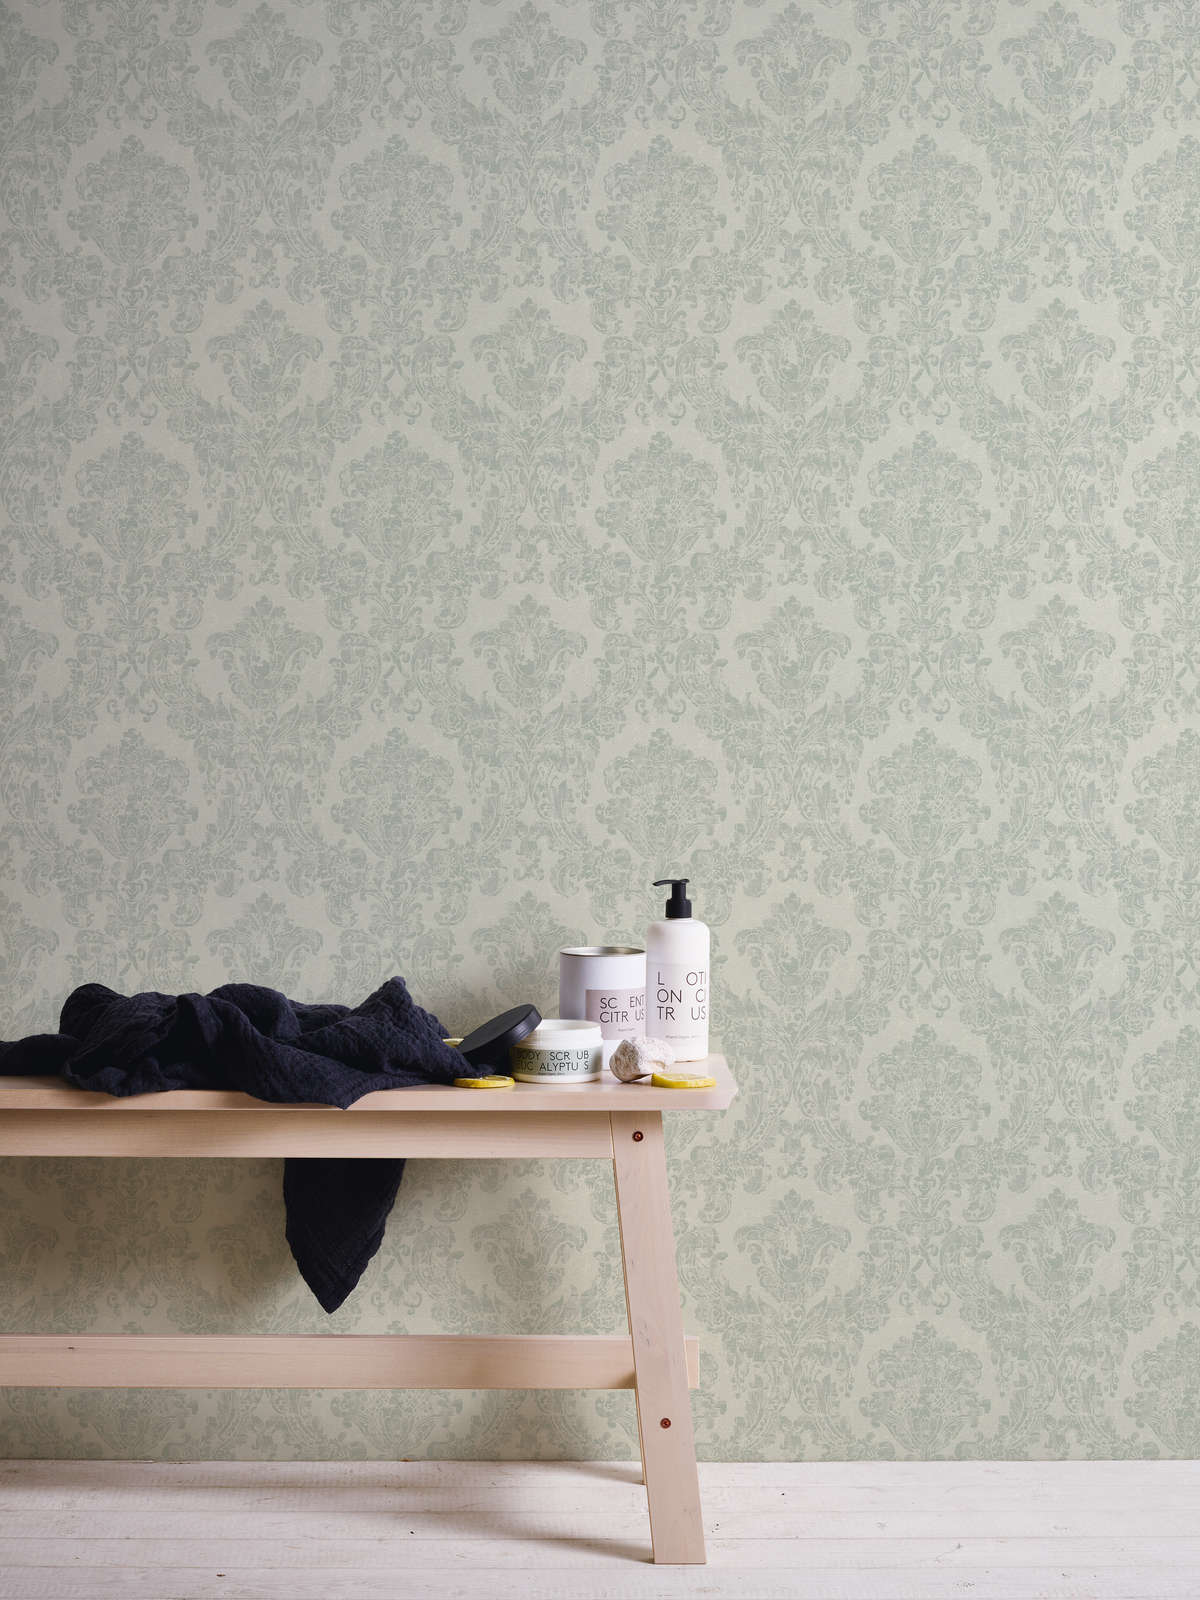             Vintage style wallpaper with ornamental pattern in used look - green
        